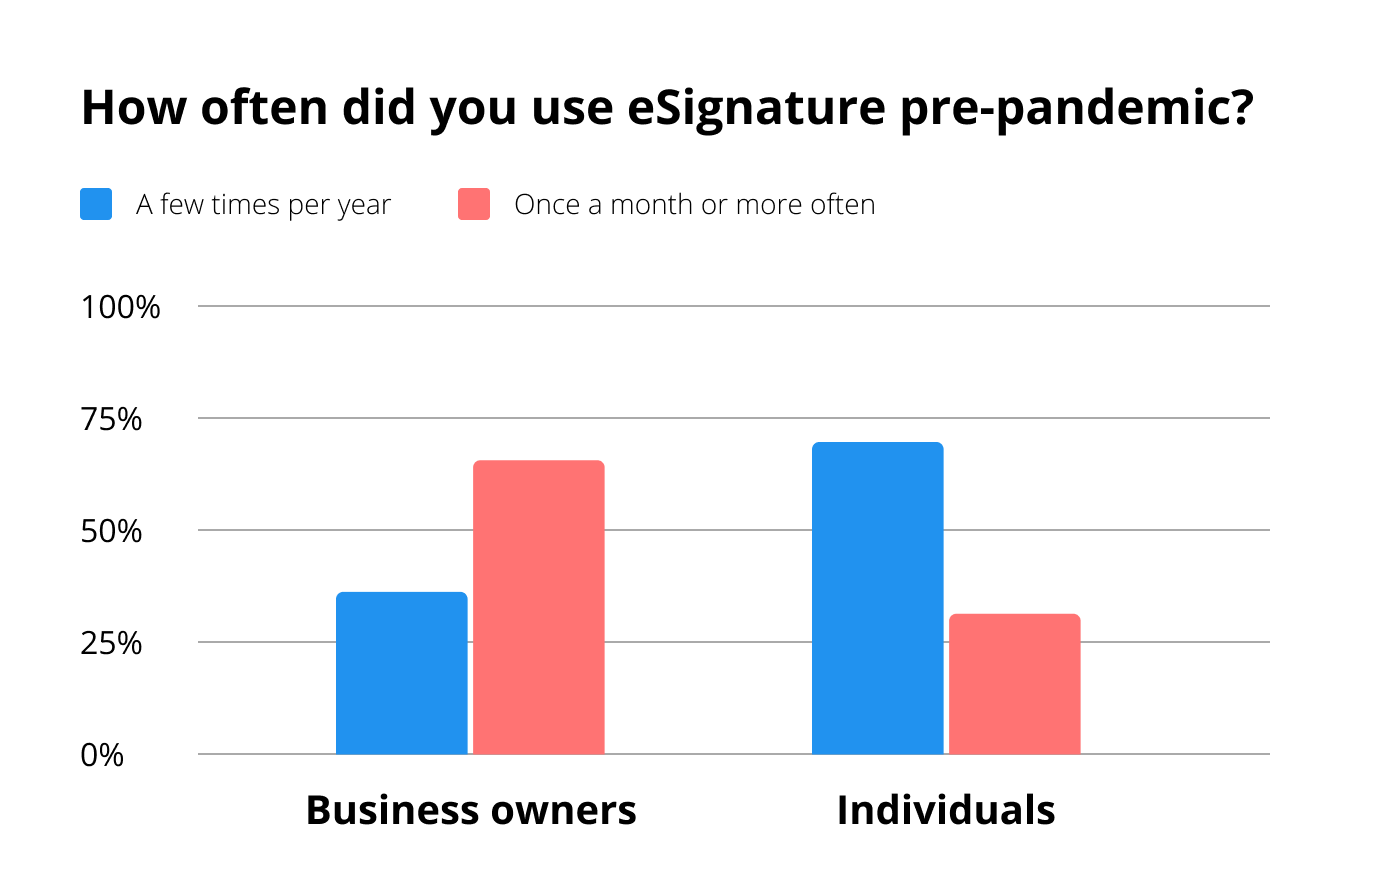 How often did US business owners and individuals used eSignature pre-pandemic? - comparison diagram